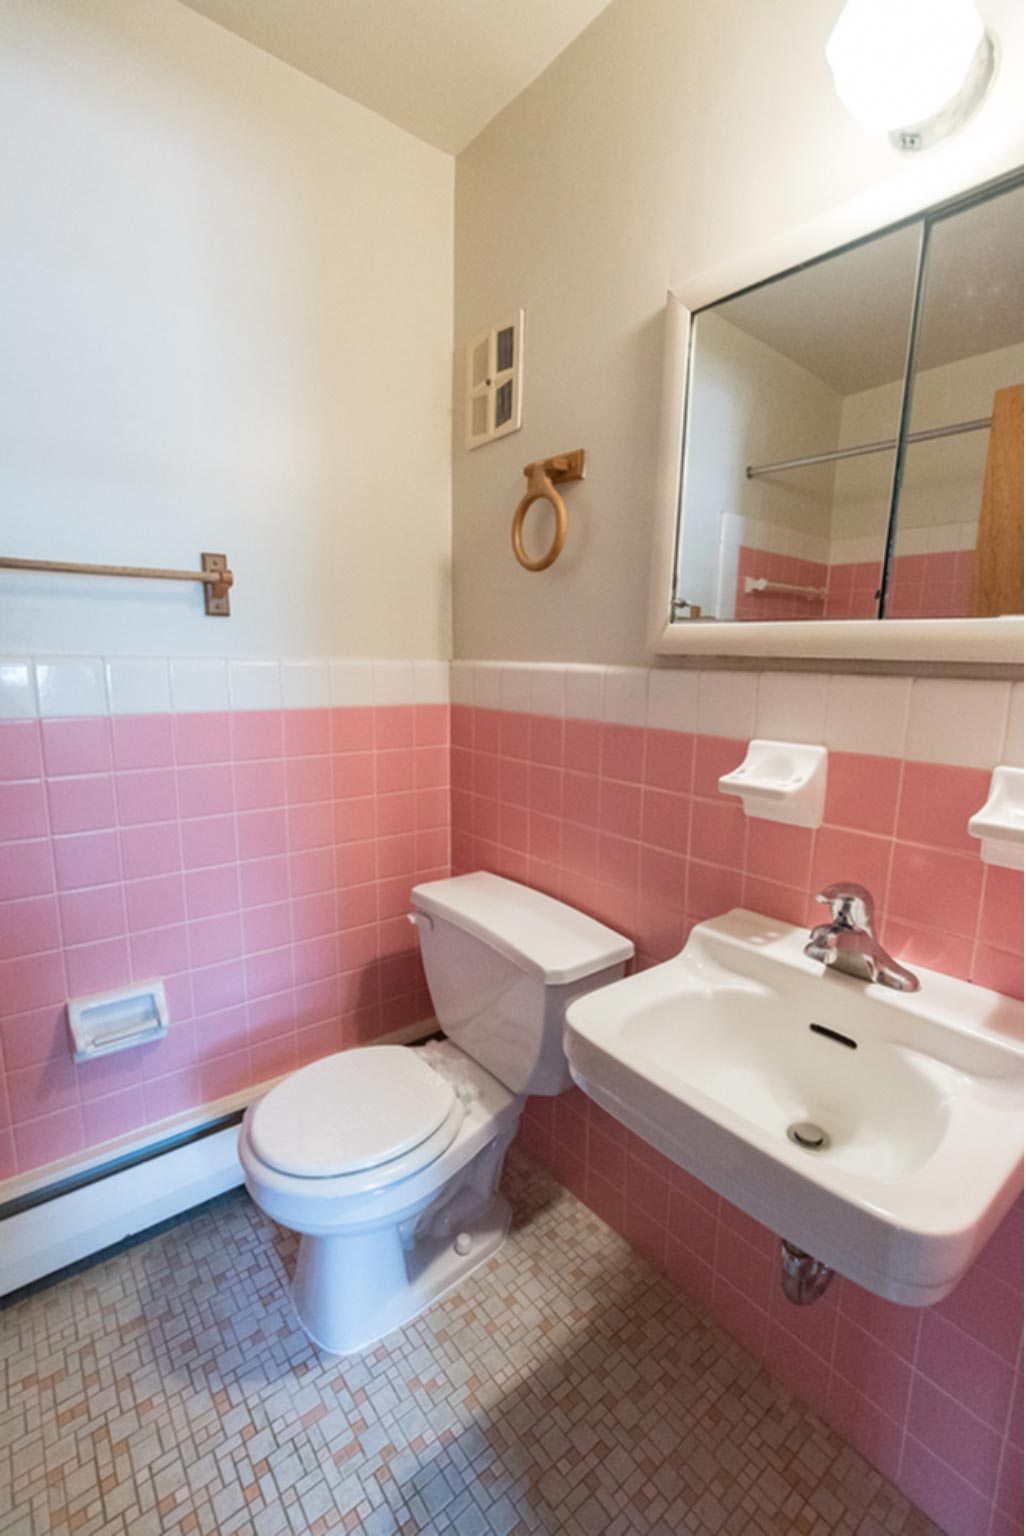 Bathroom with a mirror, light, sink, toilet, and pink tiles.